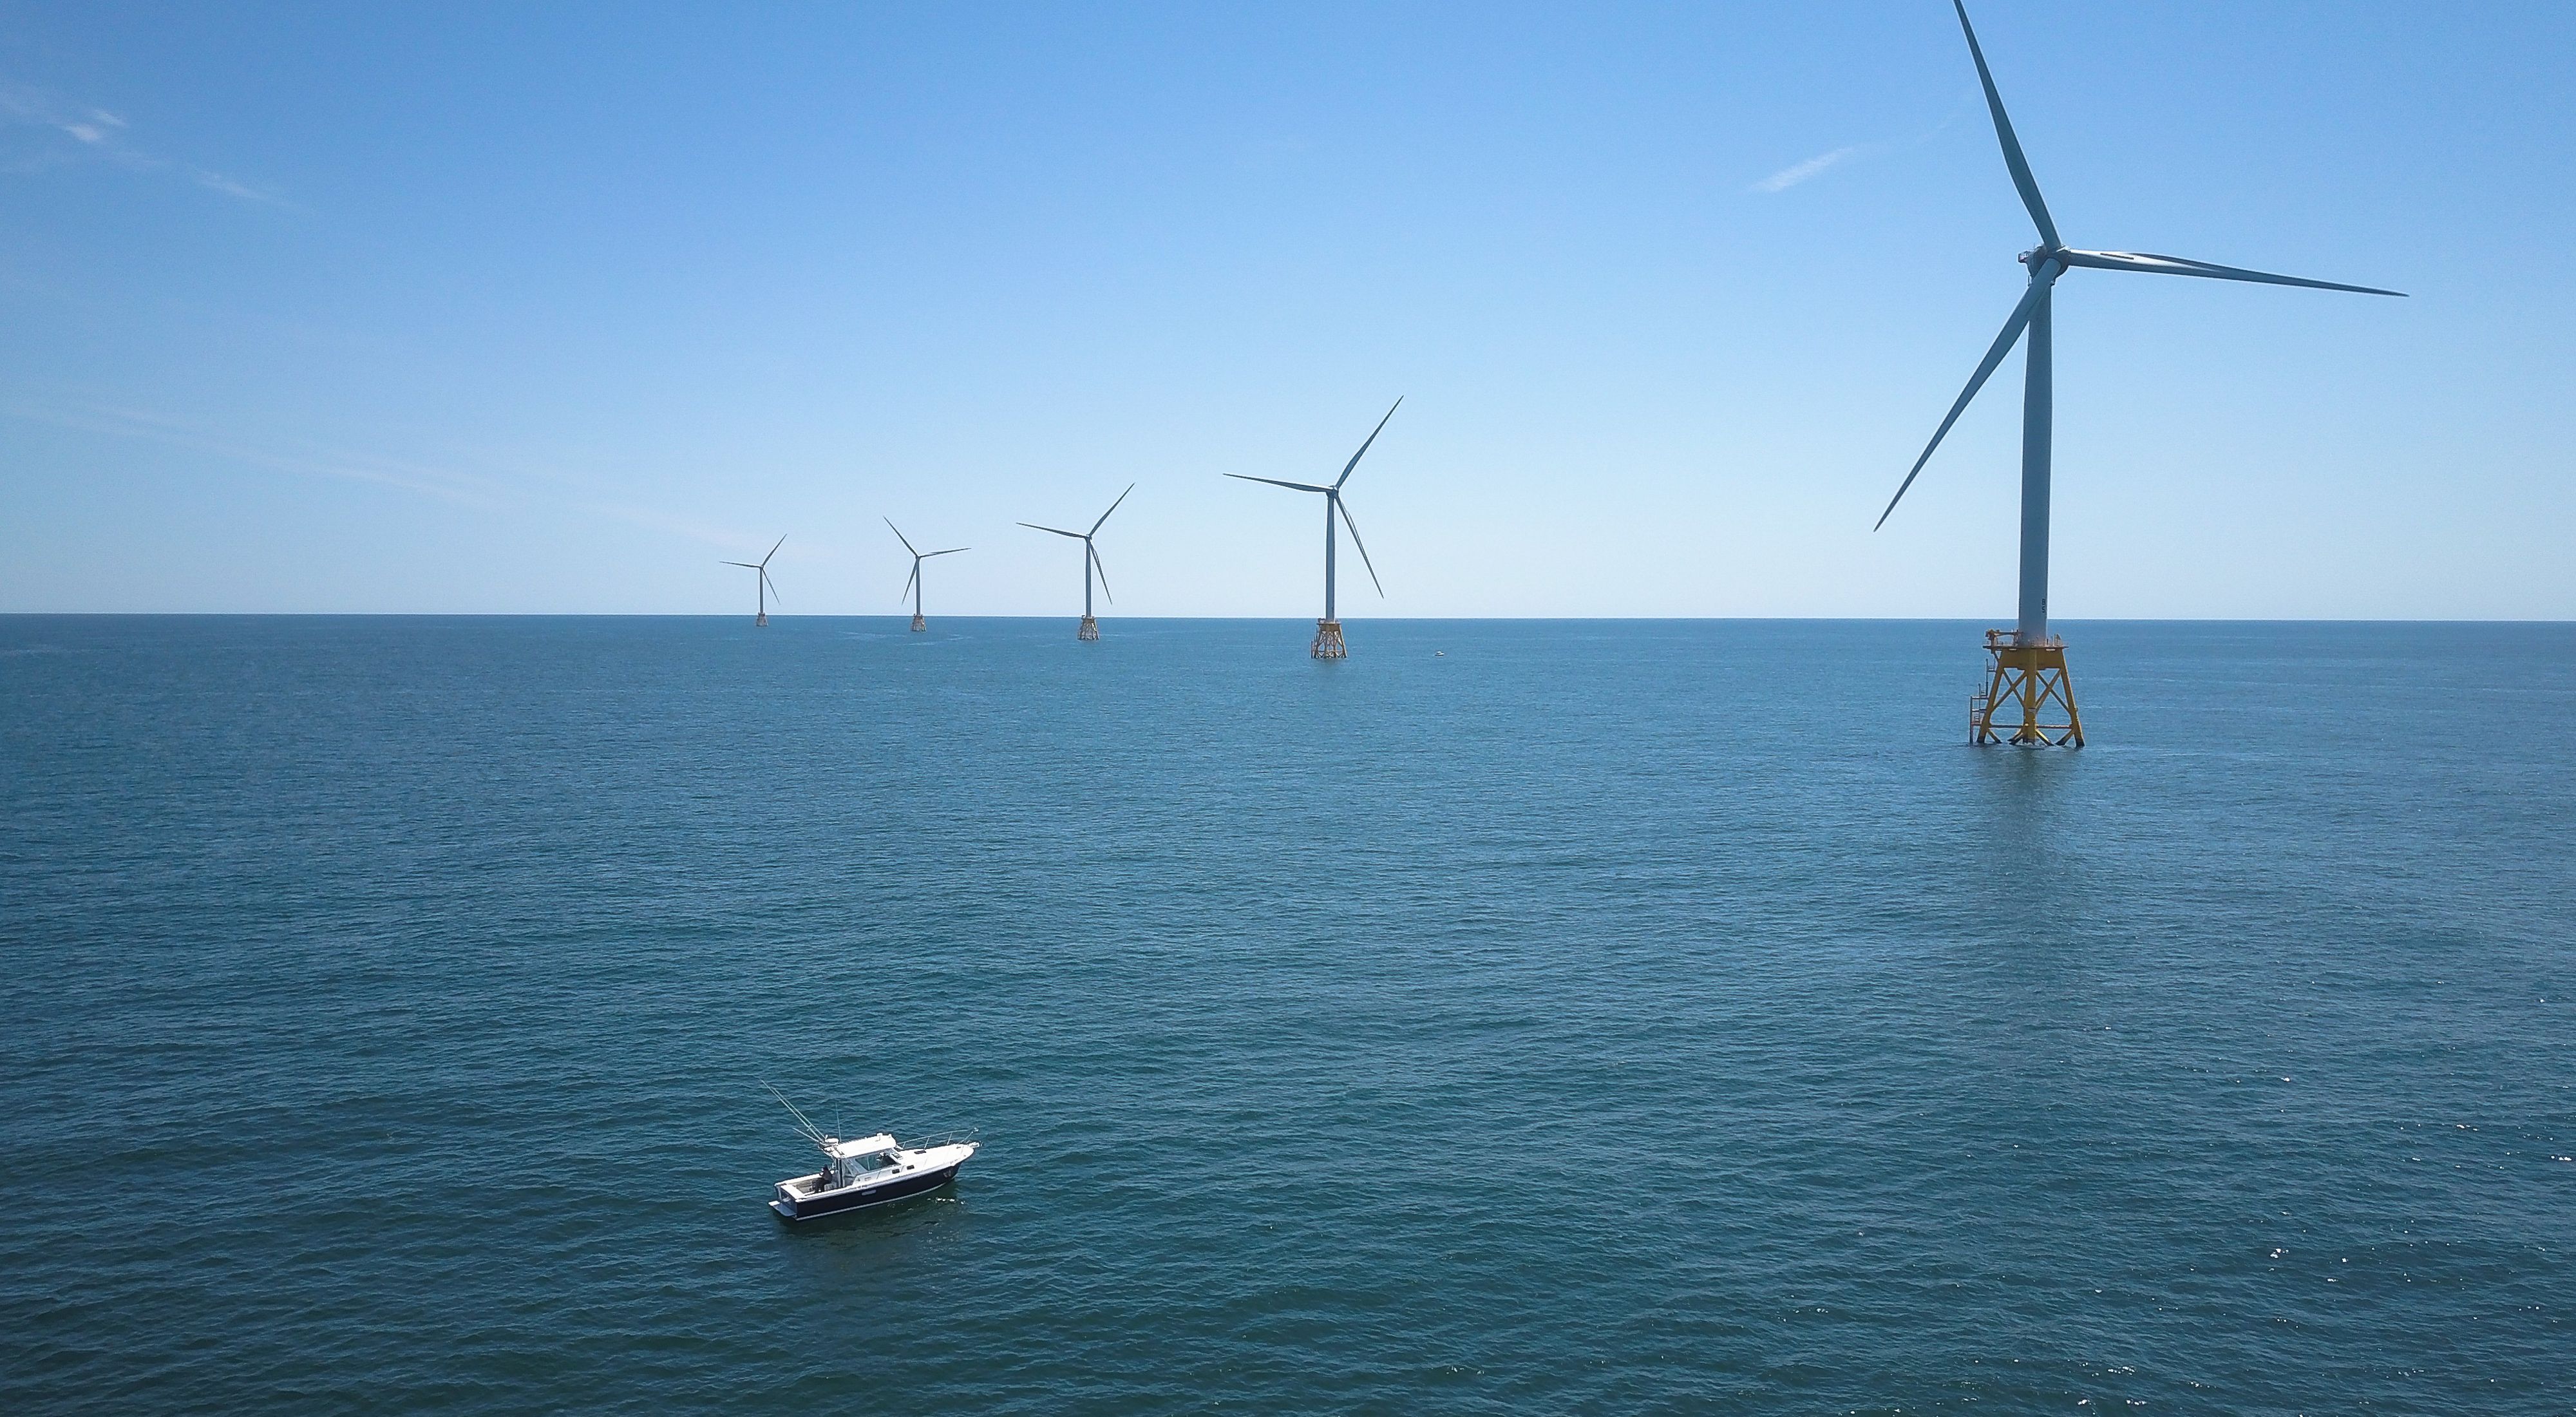 A white boat approaches five offshore wind turbines situated in descending order from close right to far left on top of a blue ocean, against a blue sky.